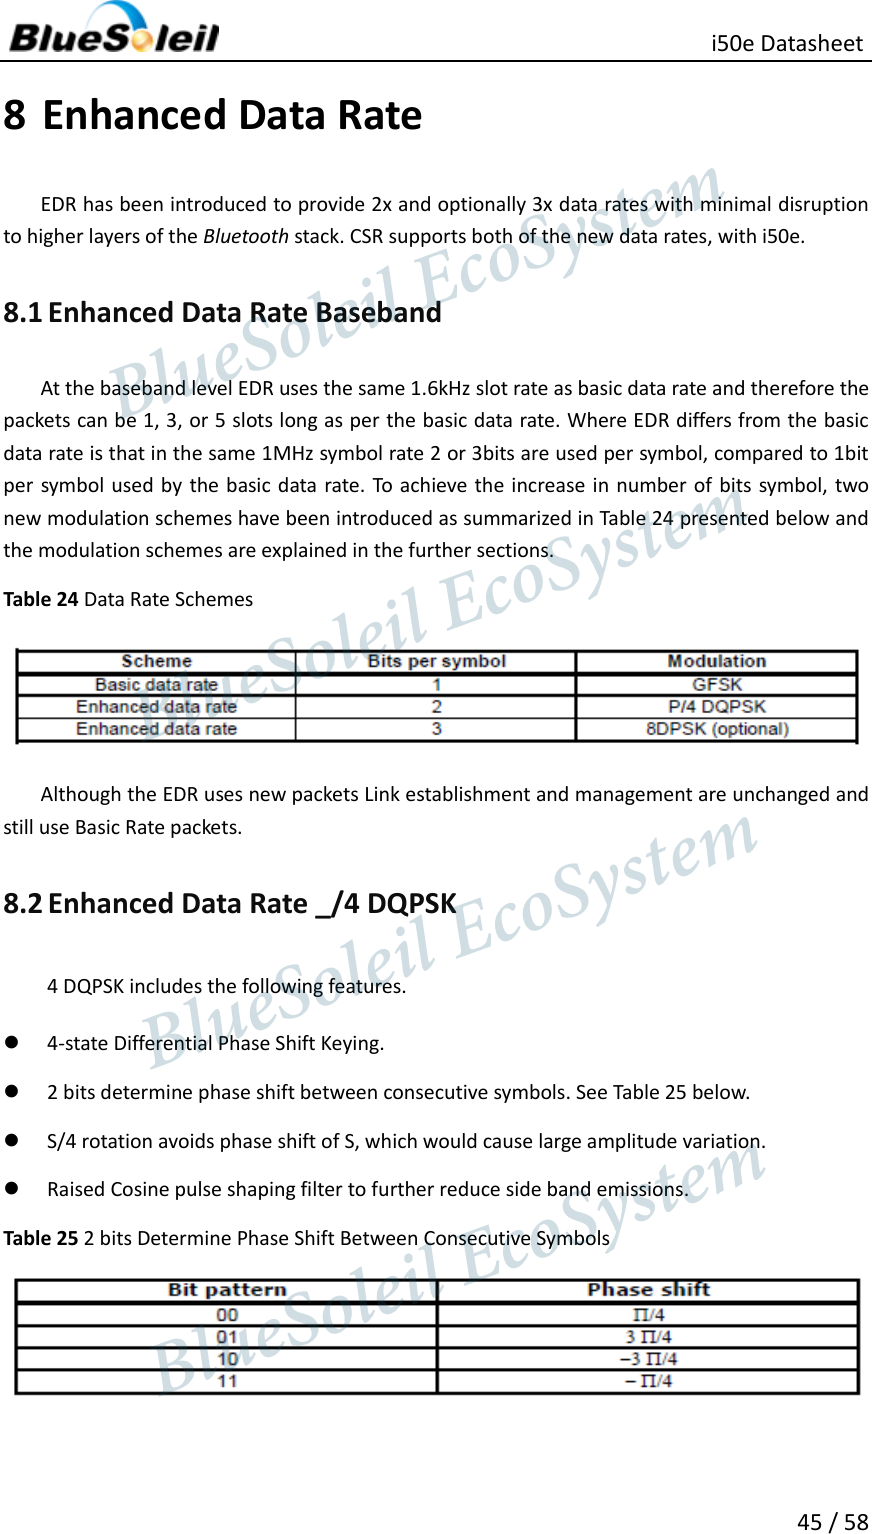                                                   i50e Datasheet 45 / 58 8 Enhanced Data Rate EDR has been introduced to provide 2x and optionally 3x data rates with minimal disruption to higher layers of the Bluetooth stack. CSR supports both of the new data rates, with i50e.   8.1 Enhanced Data Rate Baseband At the baseband level EDR uses the same 1.6kHz slot rate as basic data rate and therefore the packets can be 1, 3, or 5 slots long as per the basic data rate. Where EDR differs from the basic data rate is that in the same 1MHz symbol rate 2 or 3bits are used per symbol, compared to 1bit per symbol used by  the basic data rate. To achieve the increase in number of  bits symbol, two new modulation schemes have been introduced as summarized in Table 24 presented below and the modulation schemes are explained in the further sections. Table 24 Data Rate Schemes  Although the EDR uses new packets Link establishment and management are unchanged and still use Basic Rate packets. 8.2 Enhanced Data Rate _/4 DQPSK 4 DQPSK includes the following features.  4-state Differential Phase Shift Keying.  2 bits determine phase shift between consecutive symbols. See Table 25 below.  S/4 rotation avoids phase shift of S, which would cause large amplitude variation.  Raised Cosine pulse shaping filter to further reduce side band emissions. Table 25 2 bits Determine Phase Shift Between Consecutive Symbols                   BlueSoleil EcoSystem            BlueSoleil EcoSystem      BlueSoleil EcoSystemBlueSoleil EcoSystem